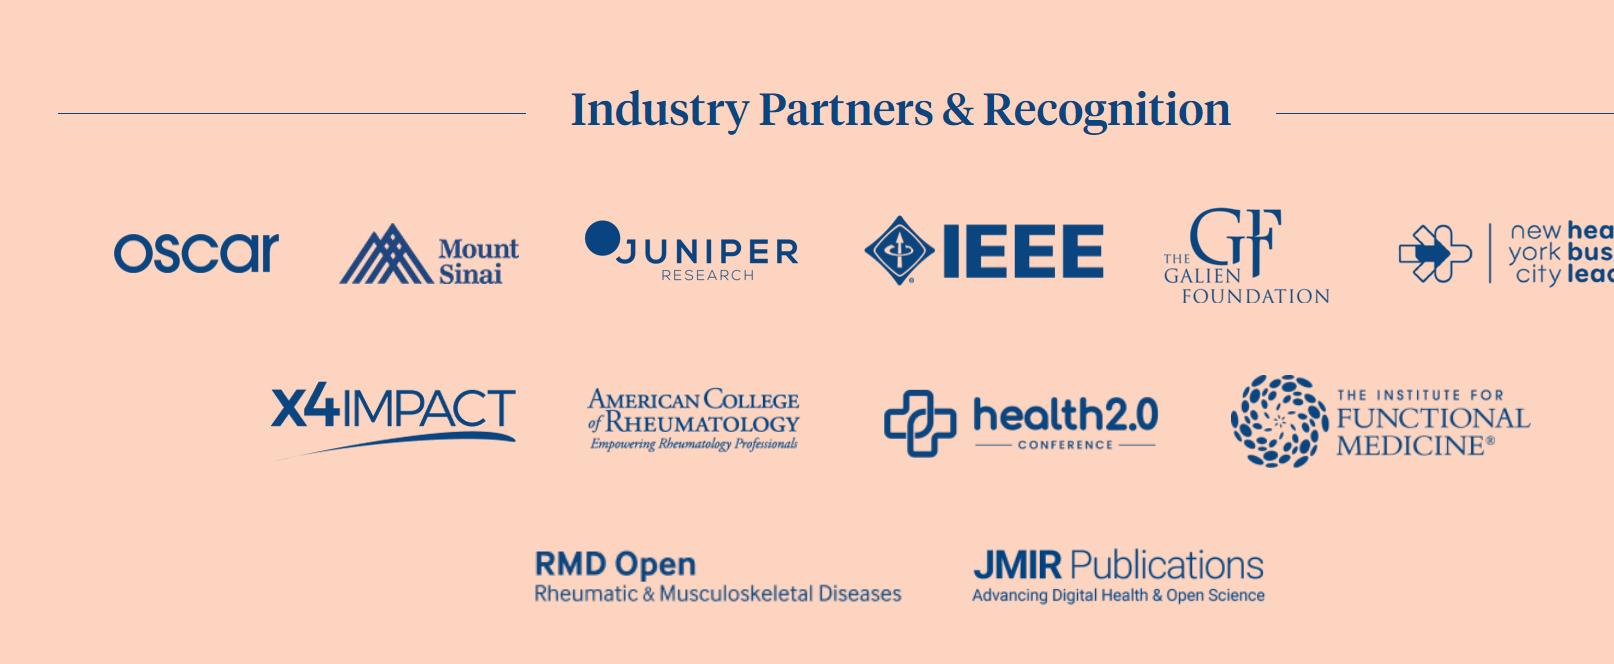 mymee industry partners and recognition